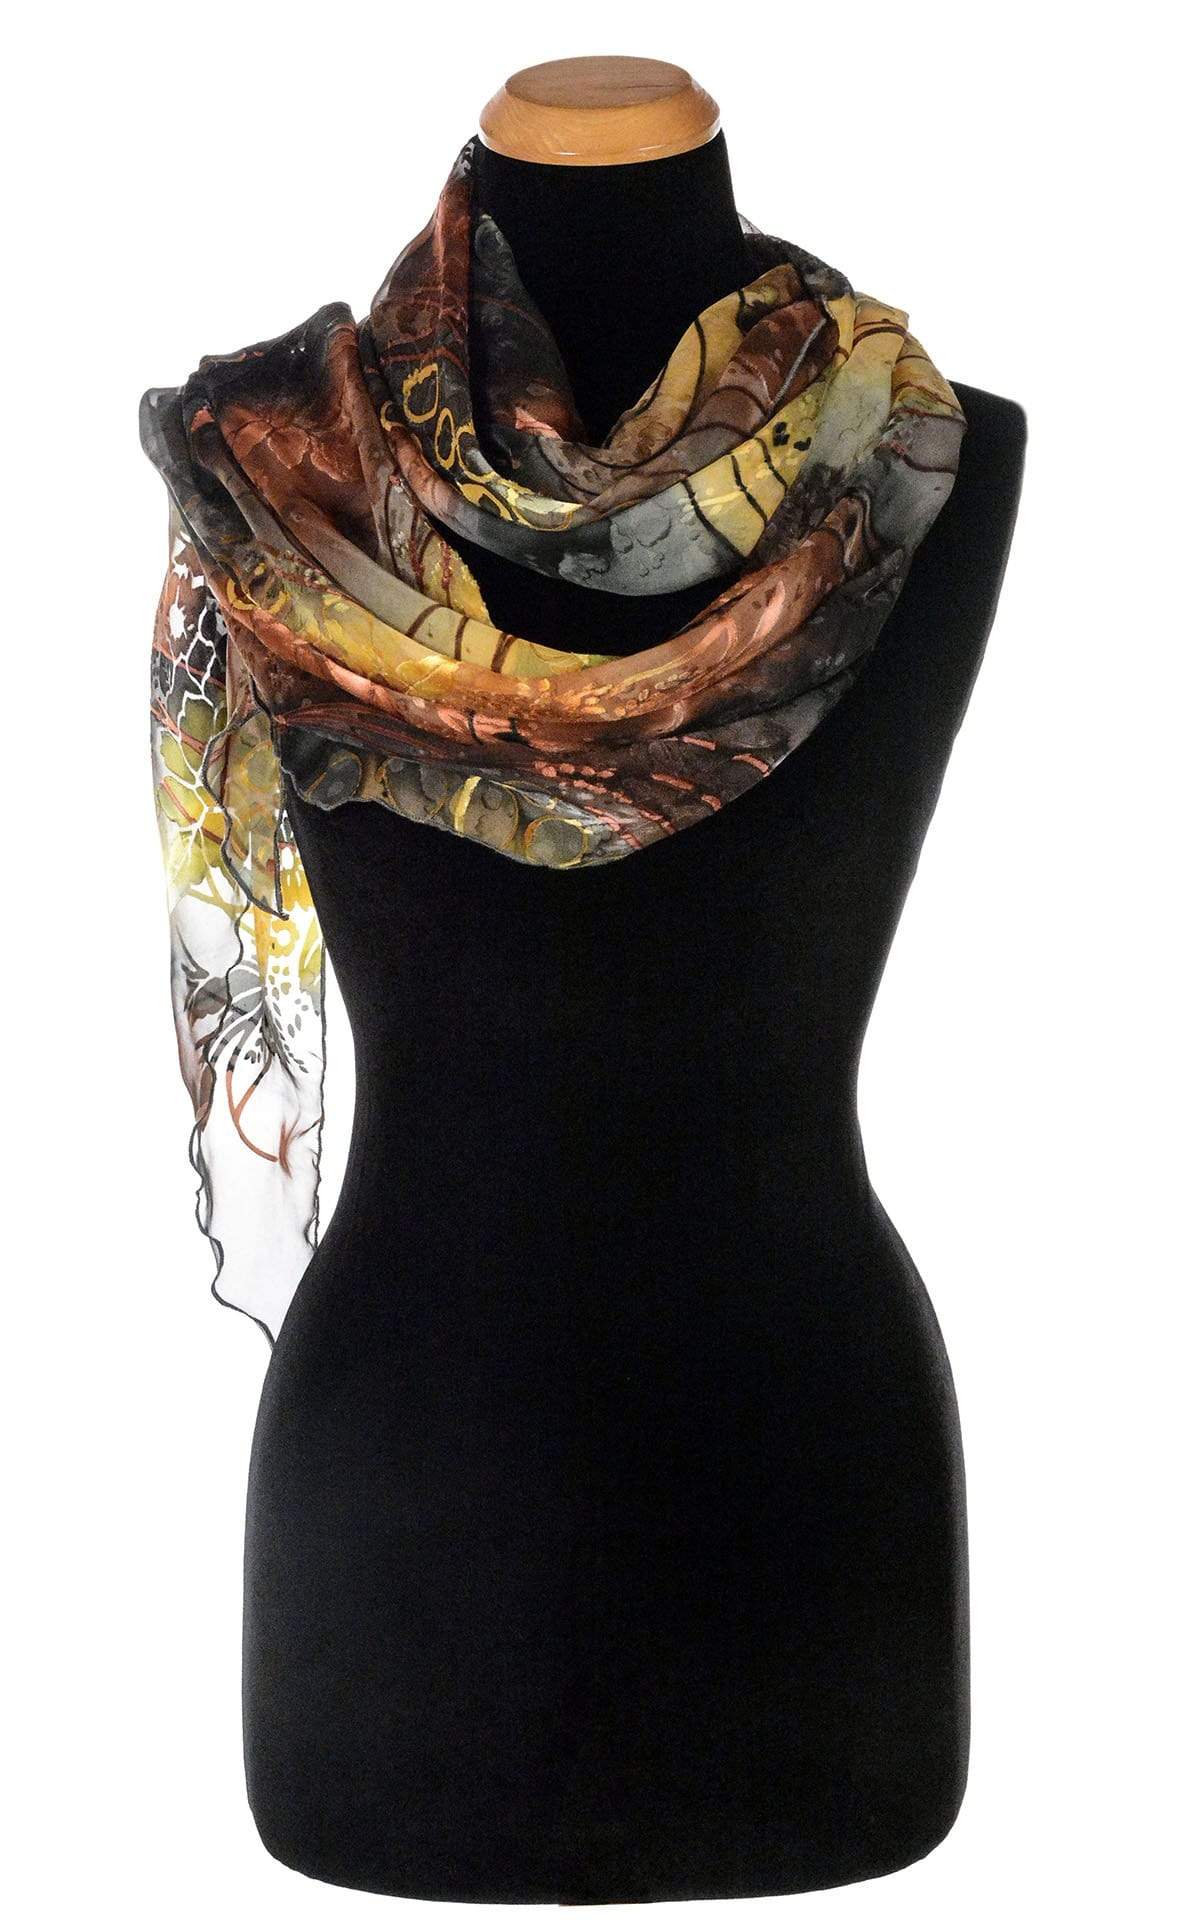 Ladies Large Handkerchief Scarf, Wrap in hand-painted silk on a mannequin | Garden Path in Tiger Lily black, green, rust, yellow, and Gray | Handmade in Seattle WA | Pandemonium Millinery